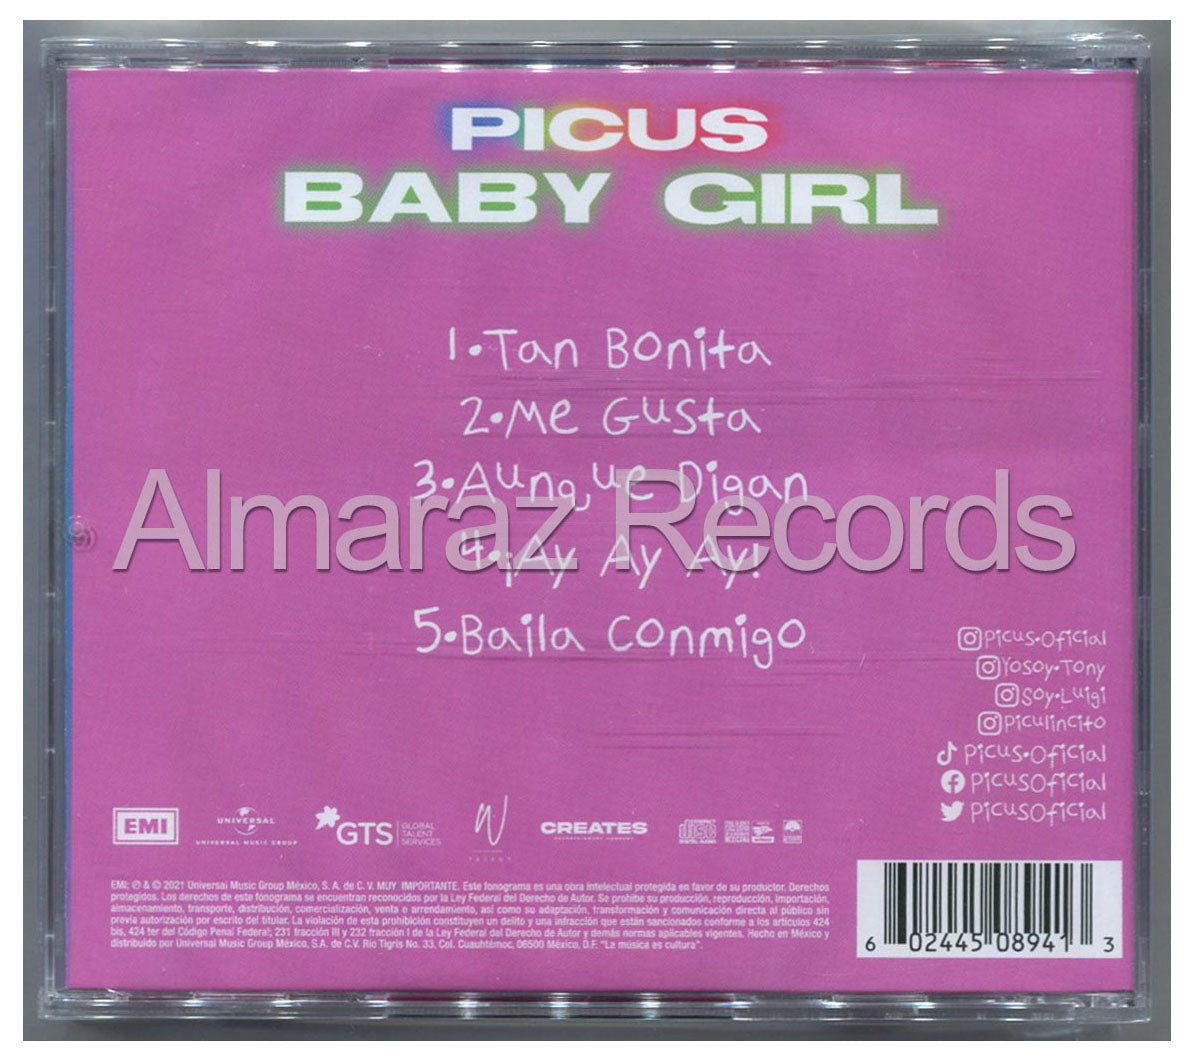 Picus Baby Girl CD